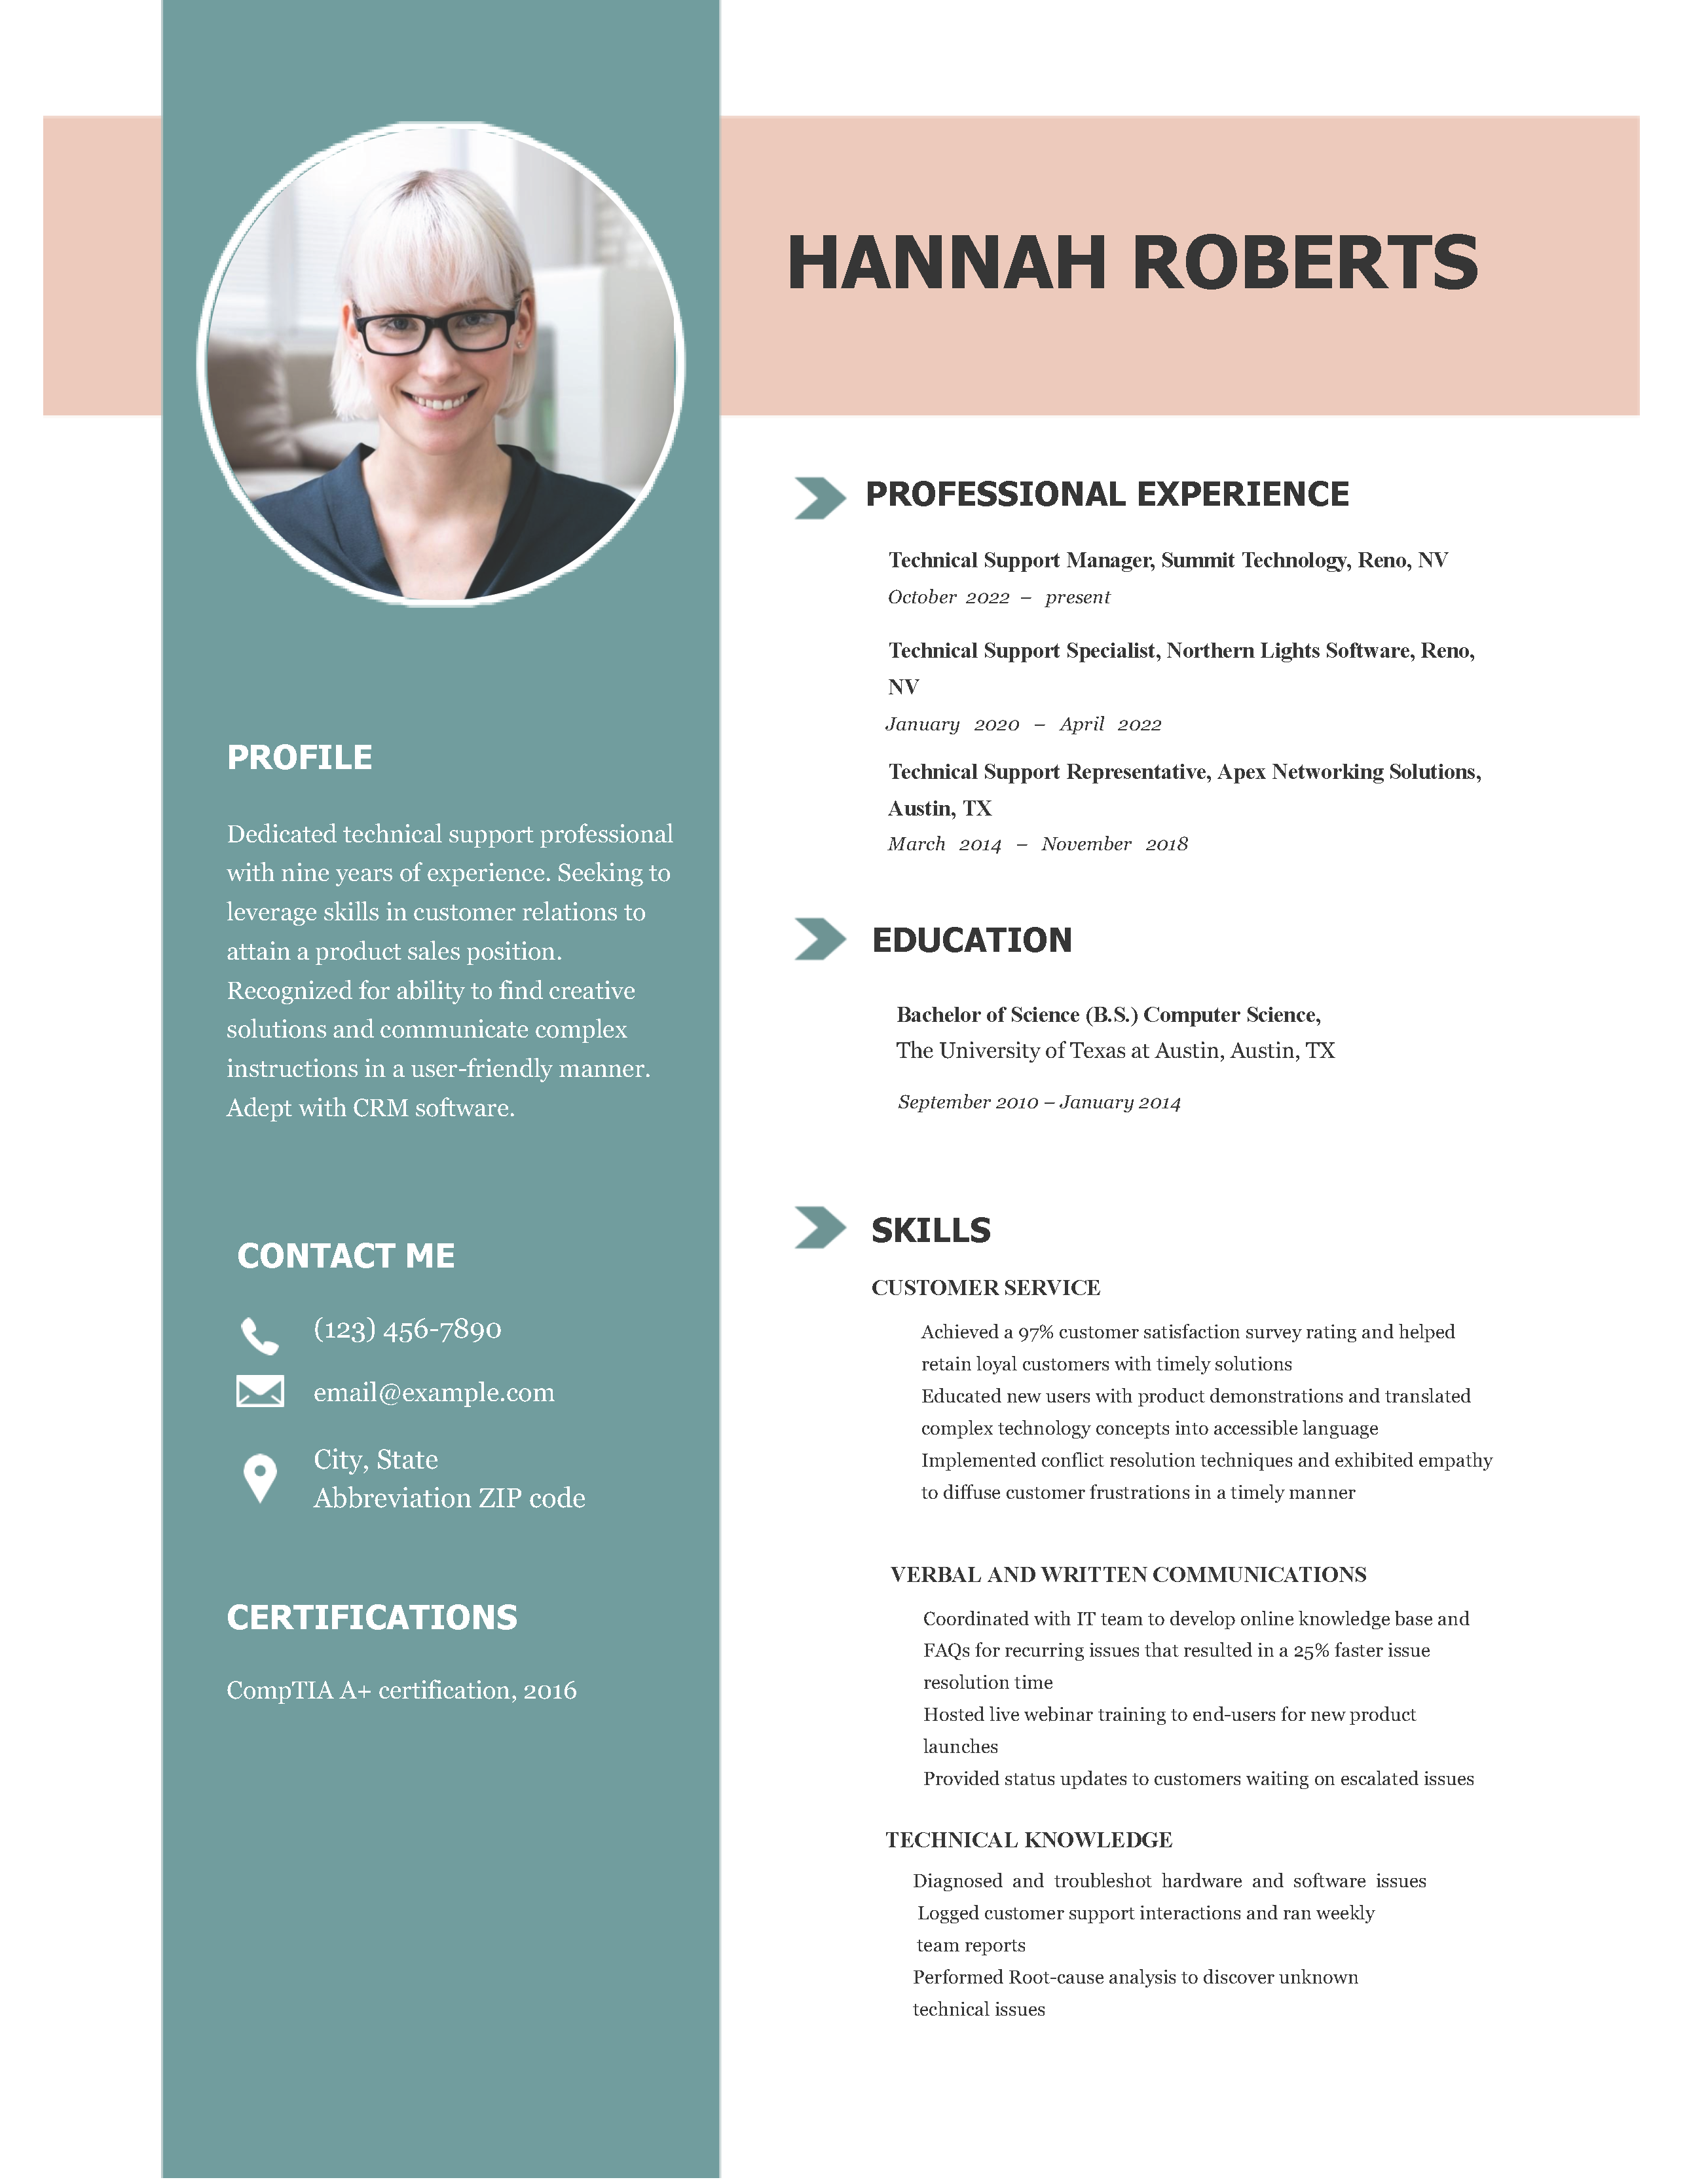 Skills Based Resume Templates and Examples Image